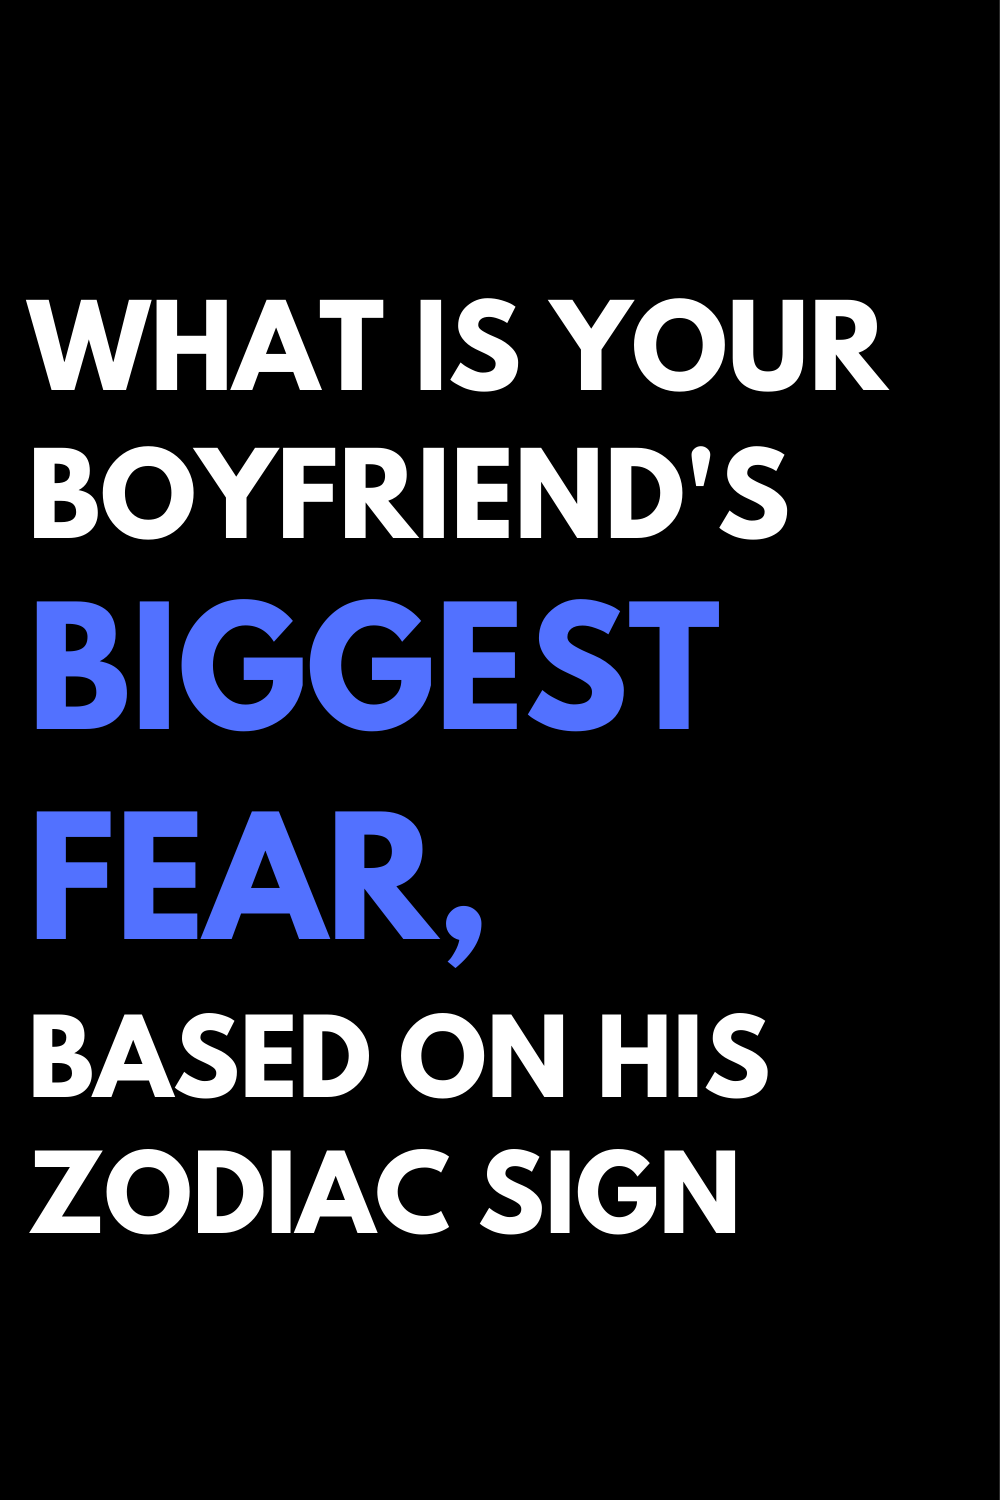 What is your boyfriend's biggest fear, based on his zodiac sign